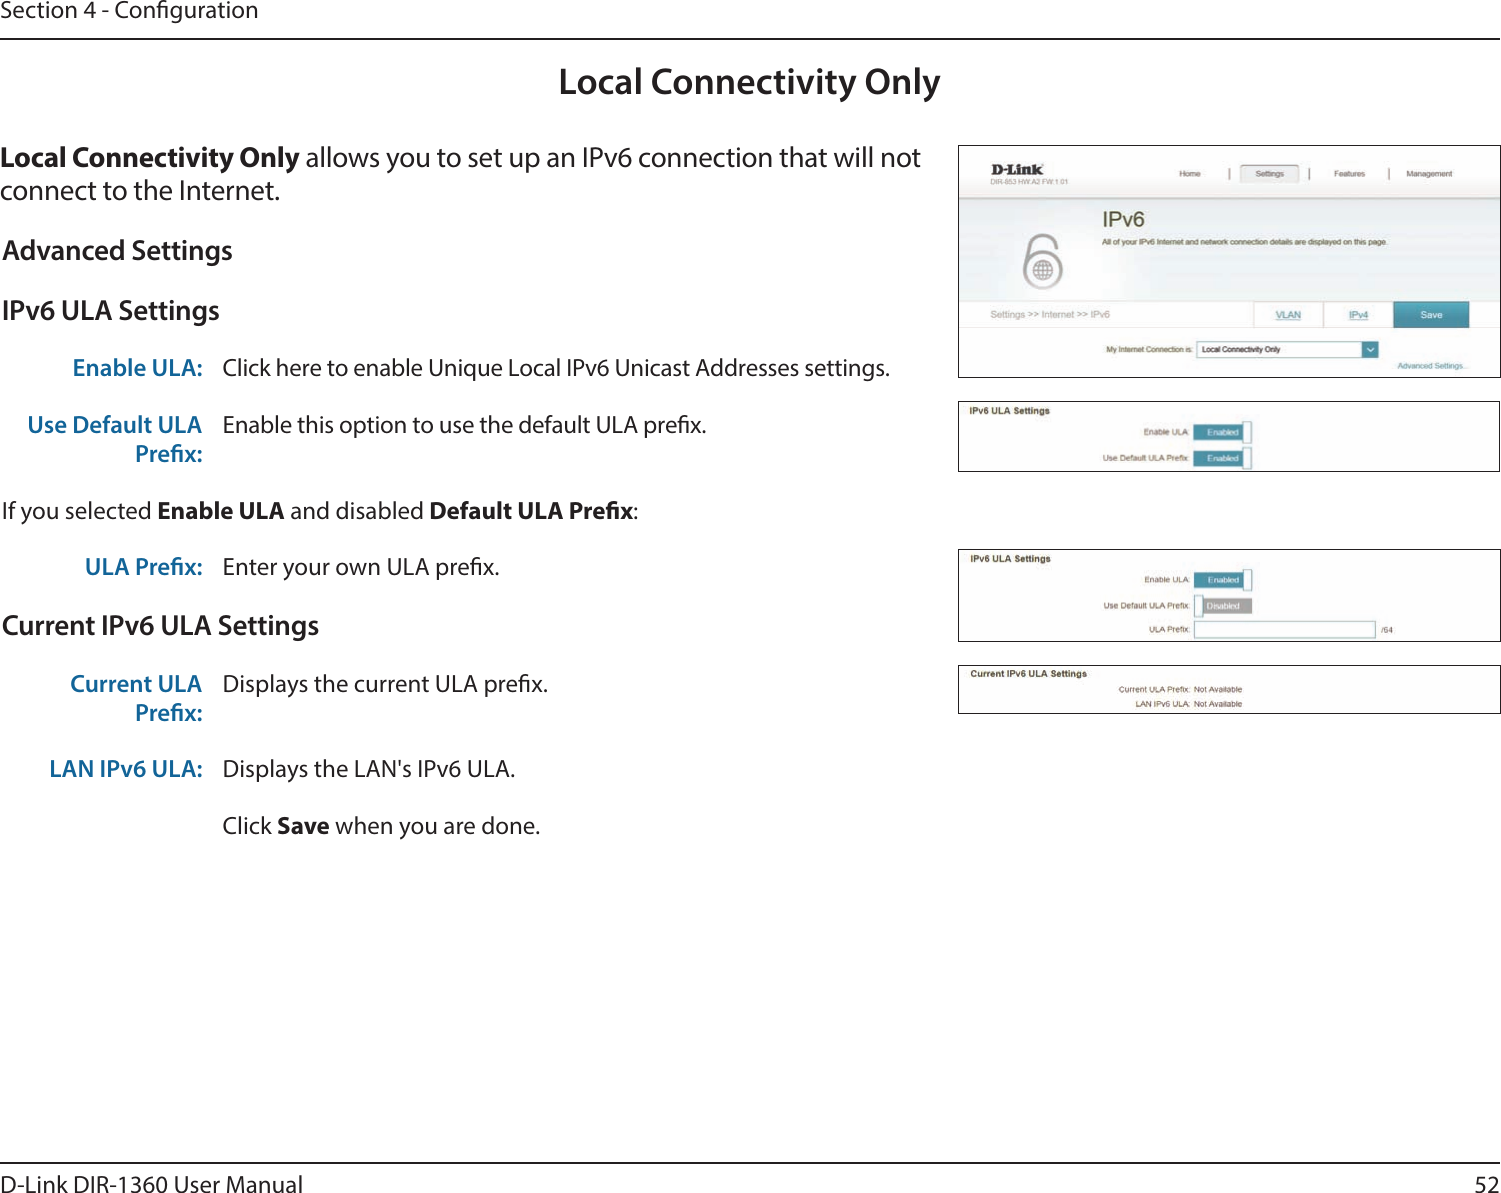 52D-Link DIR-1360 User ManualSection 4 - CongurationLocal Connectivity OnlyLocal Connectivity Only allows you to set up an IPv6 connection that will not connect to the Internet.Advanced SettingsIPv6 ULA SettingsEnable ULA: Click here to enable Unique Local IPv6 Unicast Addresses settings.Use Default ULA Prex:Enable this option to use the default ULA prex.If you selected Enable ULA and disabled Default ULA Prex:ULA Prex: Enter your own ULA prex.Current IPv6 ULA SettingsCurrent ULA Prex:Displays the current ULA prex. LAN IPv6 ULA: Displays the LAN&apos;s IPv6 ULA.Click Save when you are done.